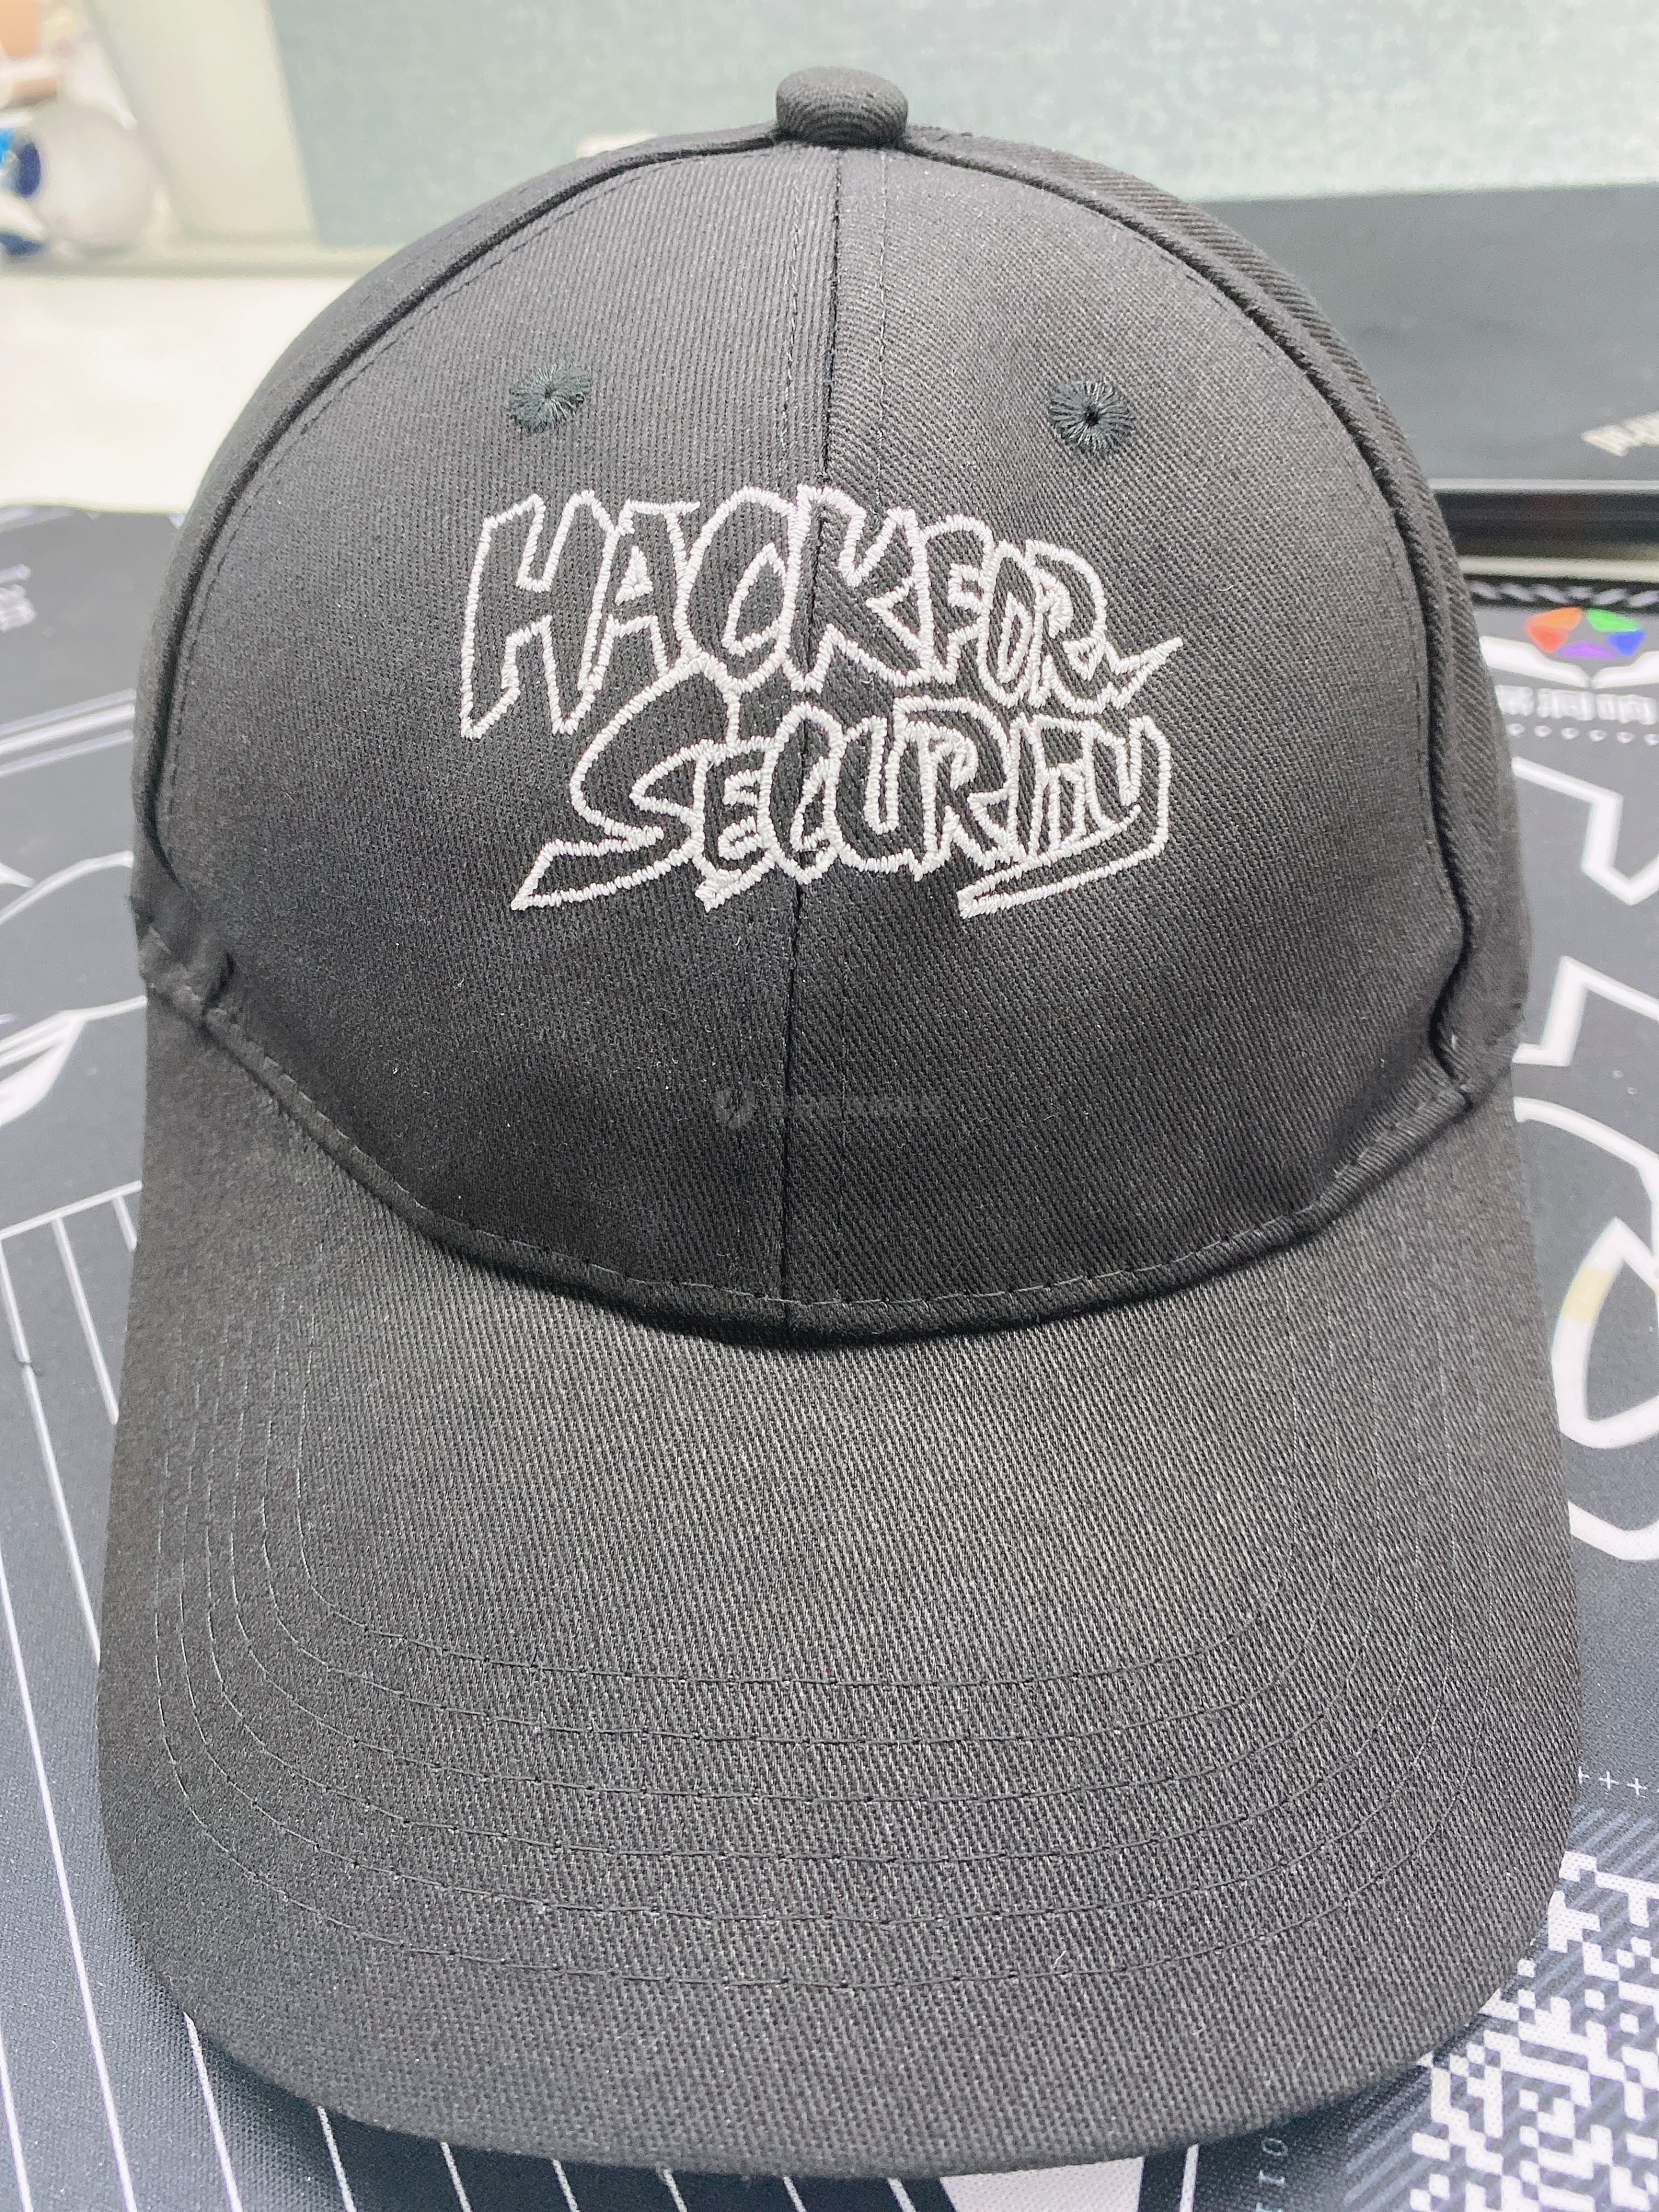 Hack For Security鸭舌帽